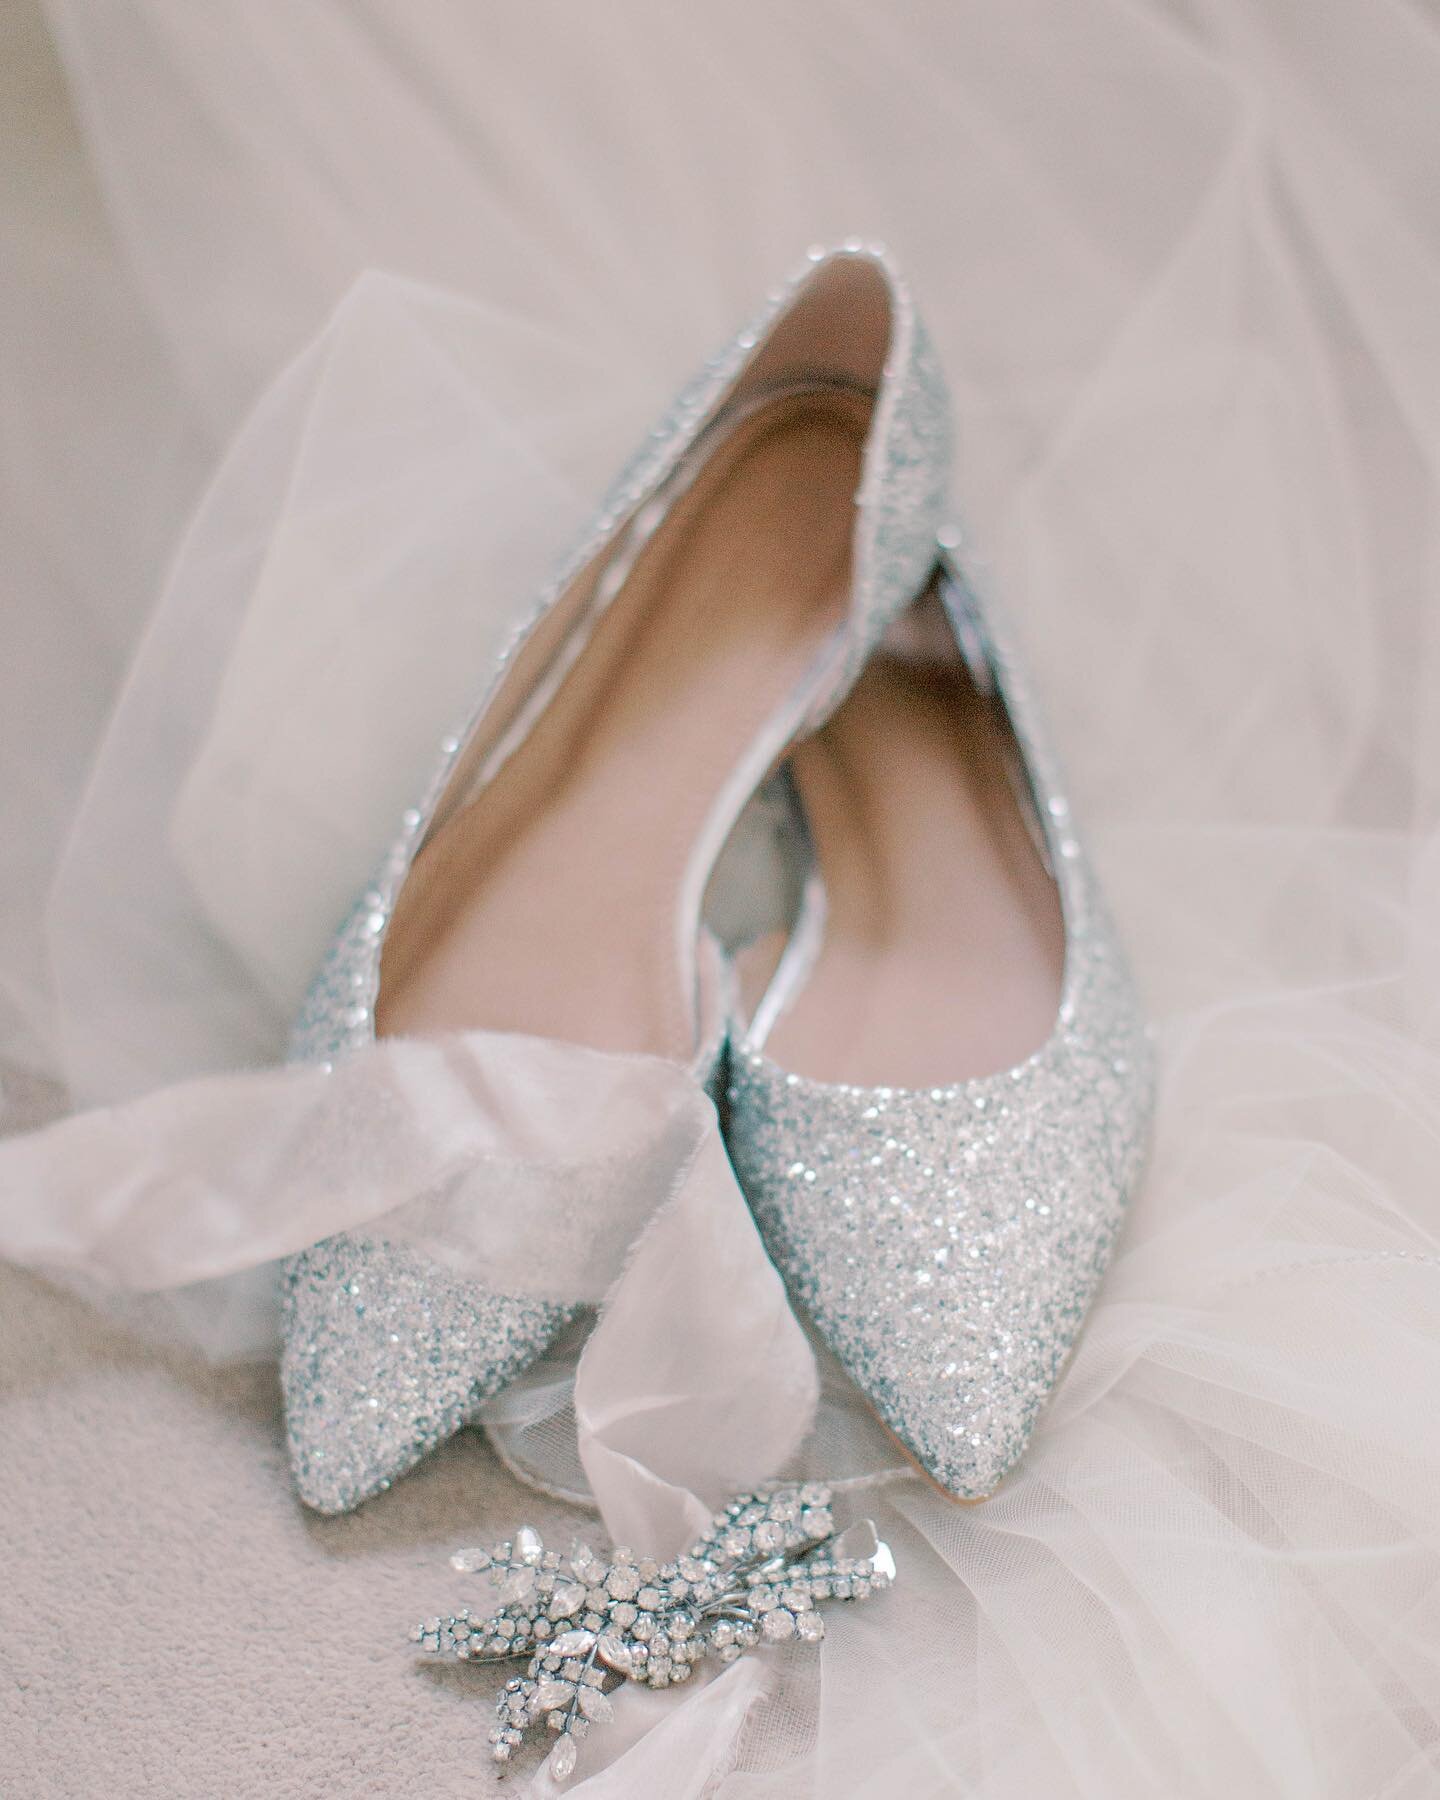 Sparkling flats for the win!
Comfy dancing shoes without compromising style.

Anyone else have a second pair of shoes for dancing?
.
.
.
#BridesmaidInspo #EuropeElopementPhotographer #FineArtWedding #DublinBride #StyleMePretty #DestinationWedding #Gi